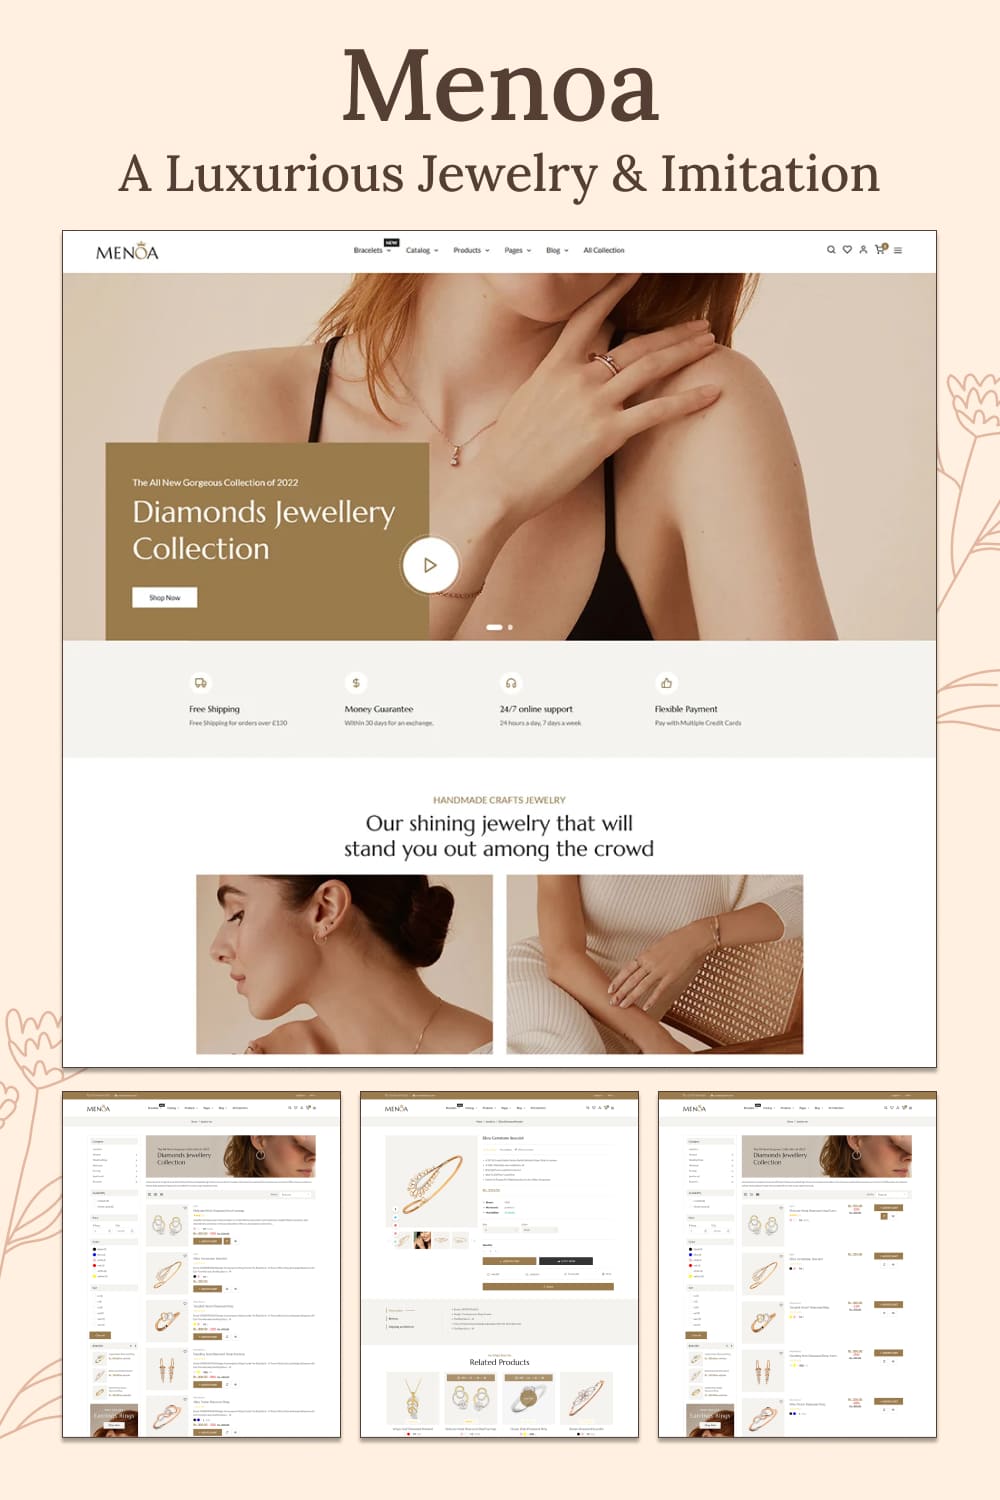 Menoa a luxurious jewelry imitation shopify responsive theme, picture for pinterest.